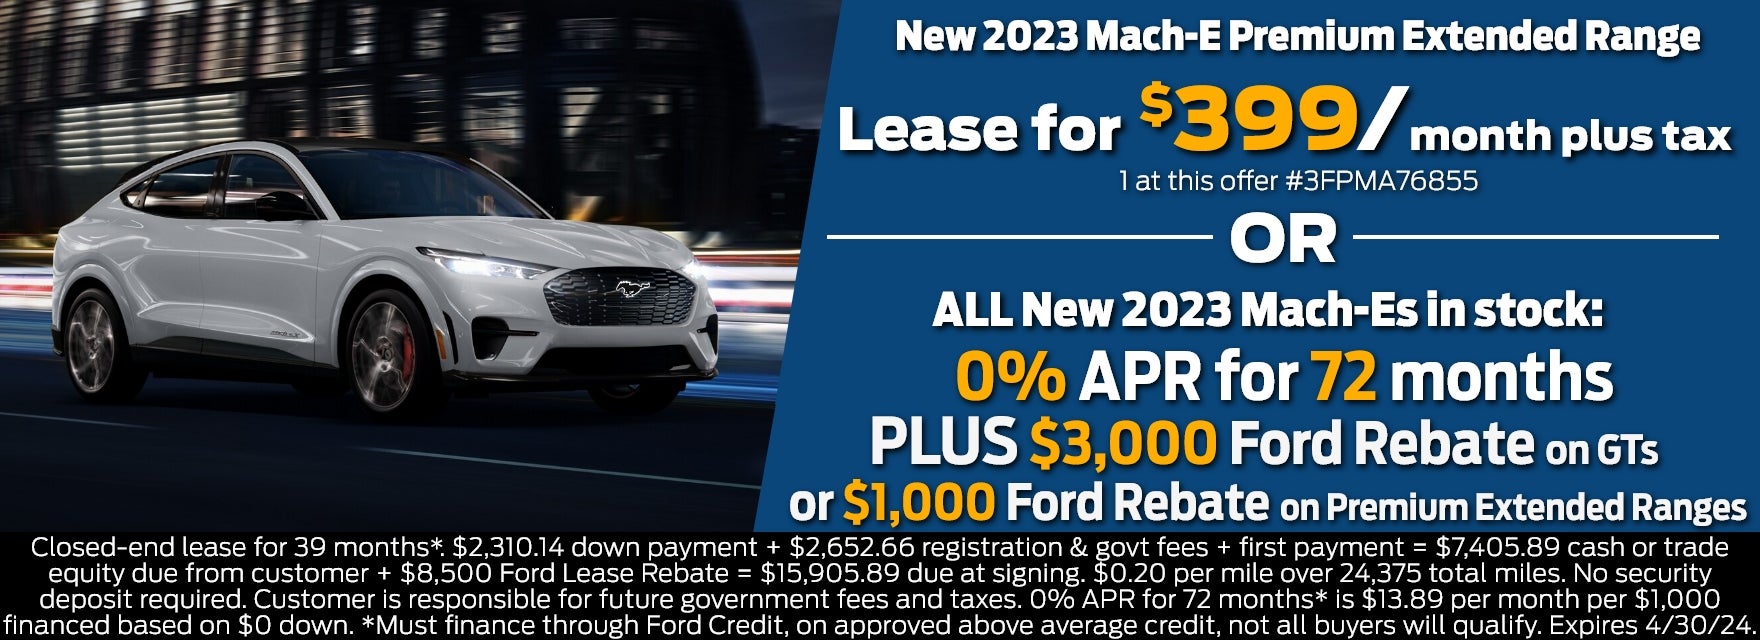 New 2023 Mach-E Premium Extended Range Lease for $399/month